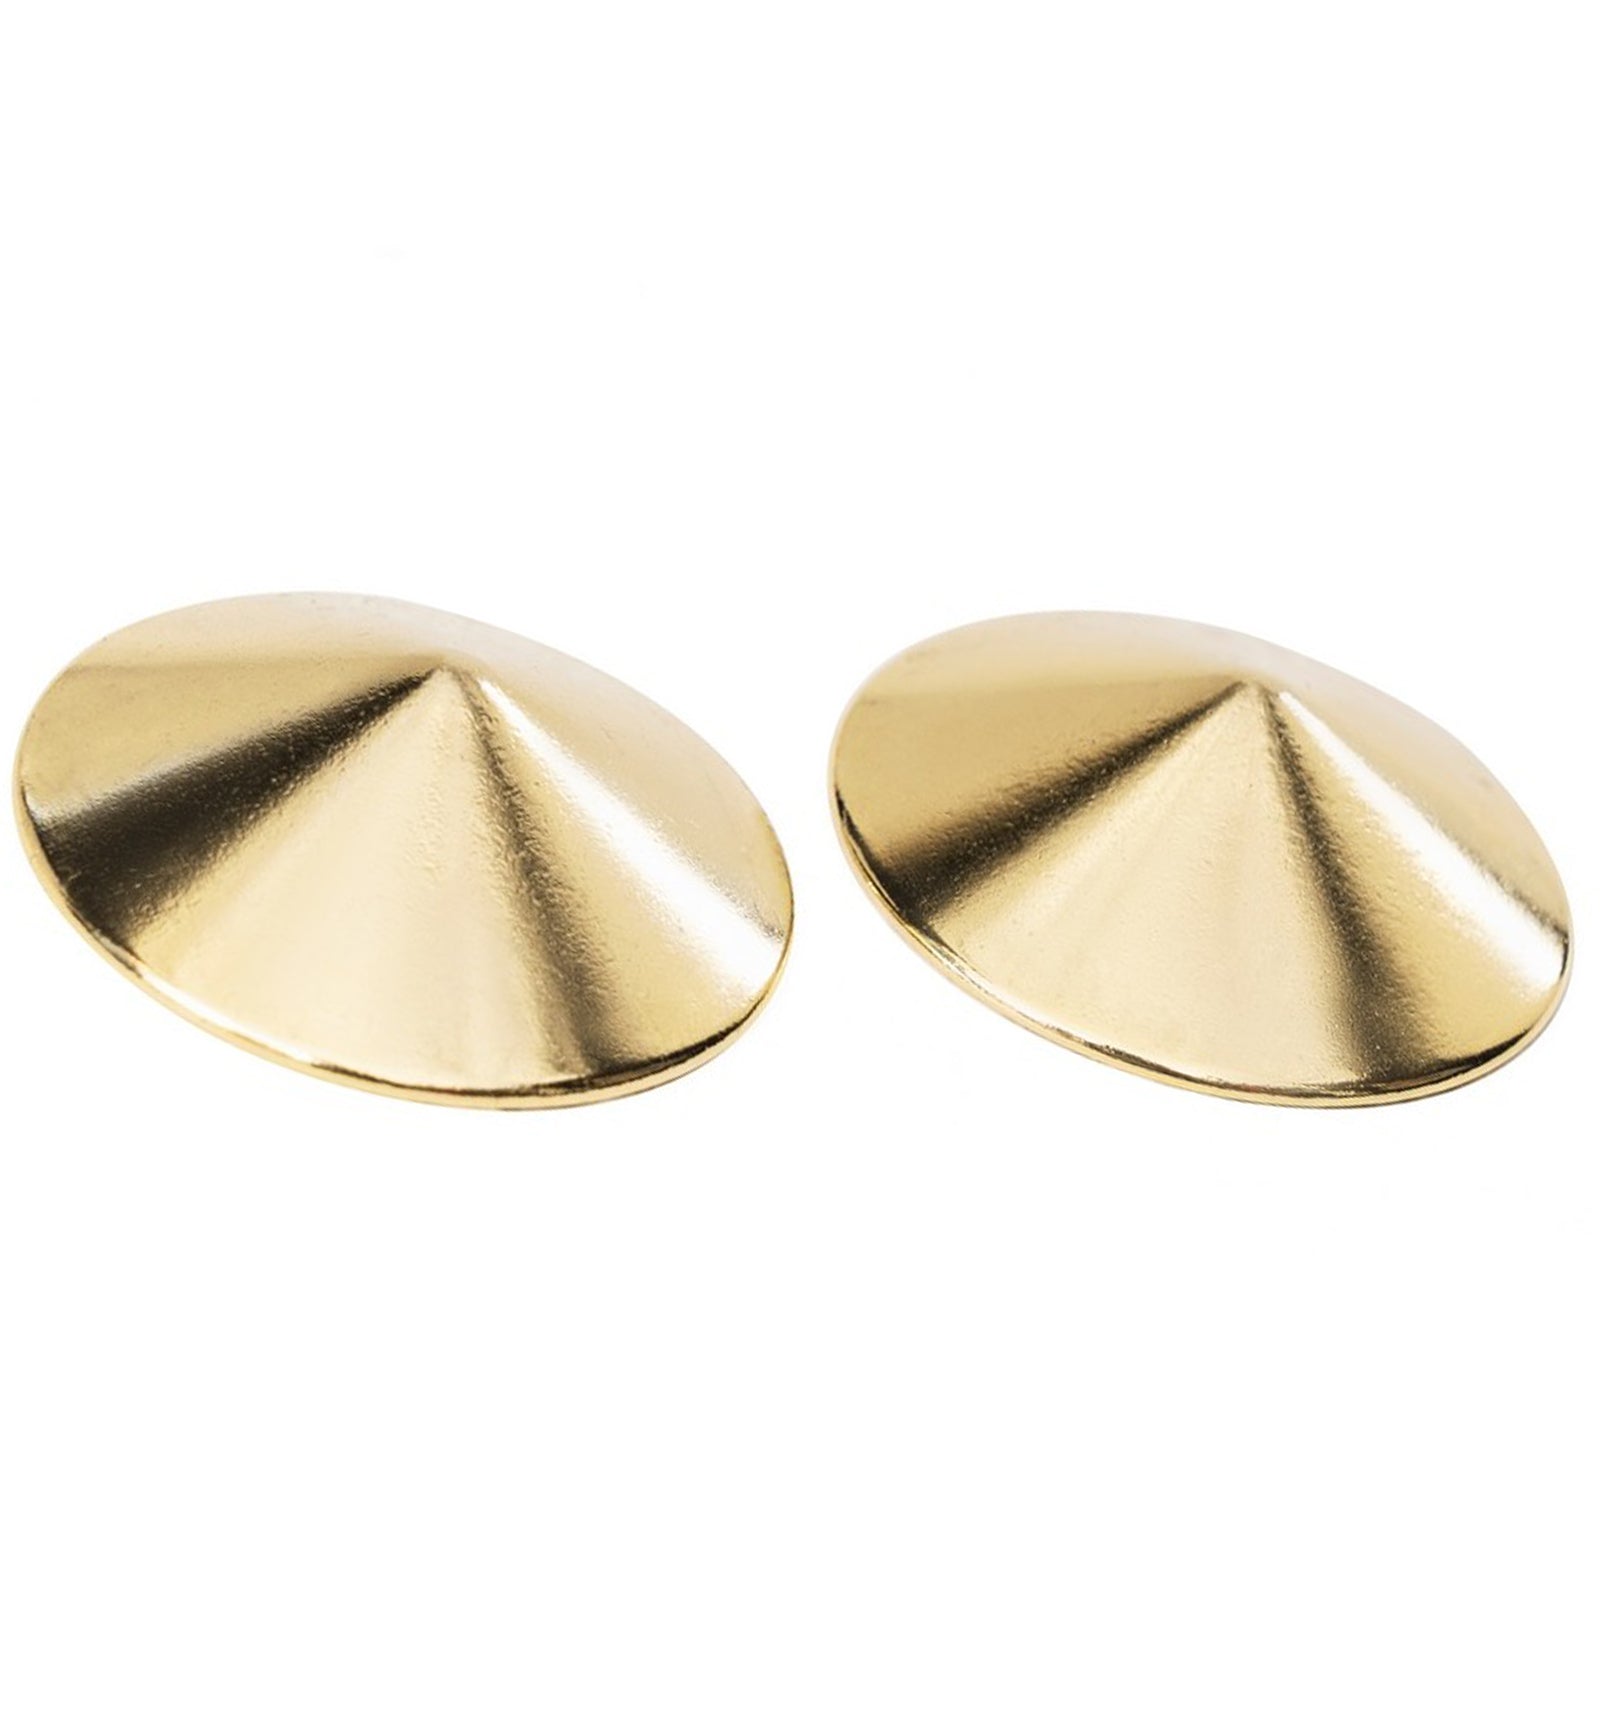 Mapale 24K Gold Plated Nipplets (999) 1 Pair - Gold